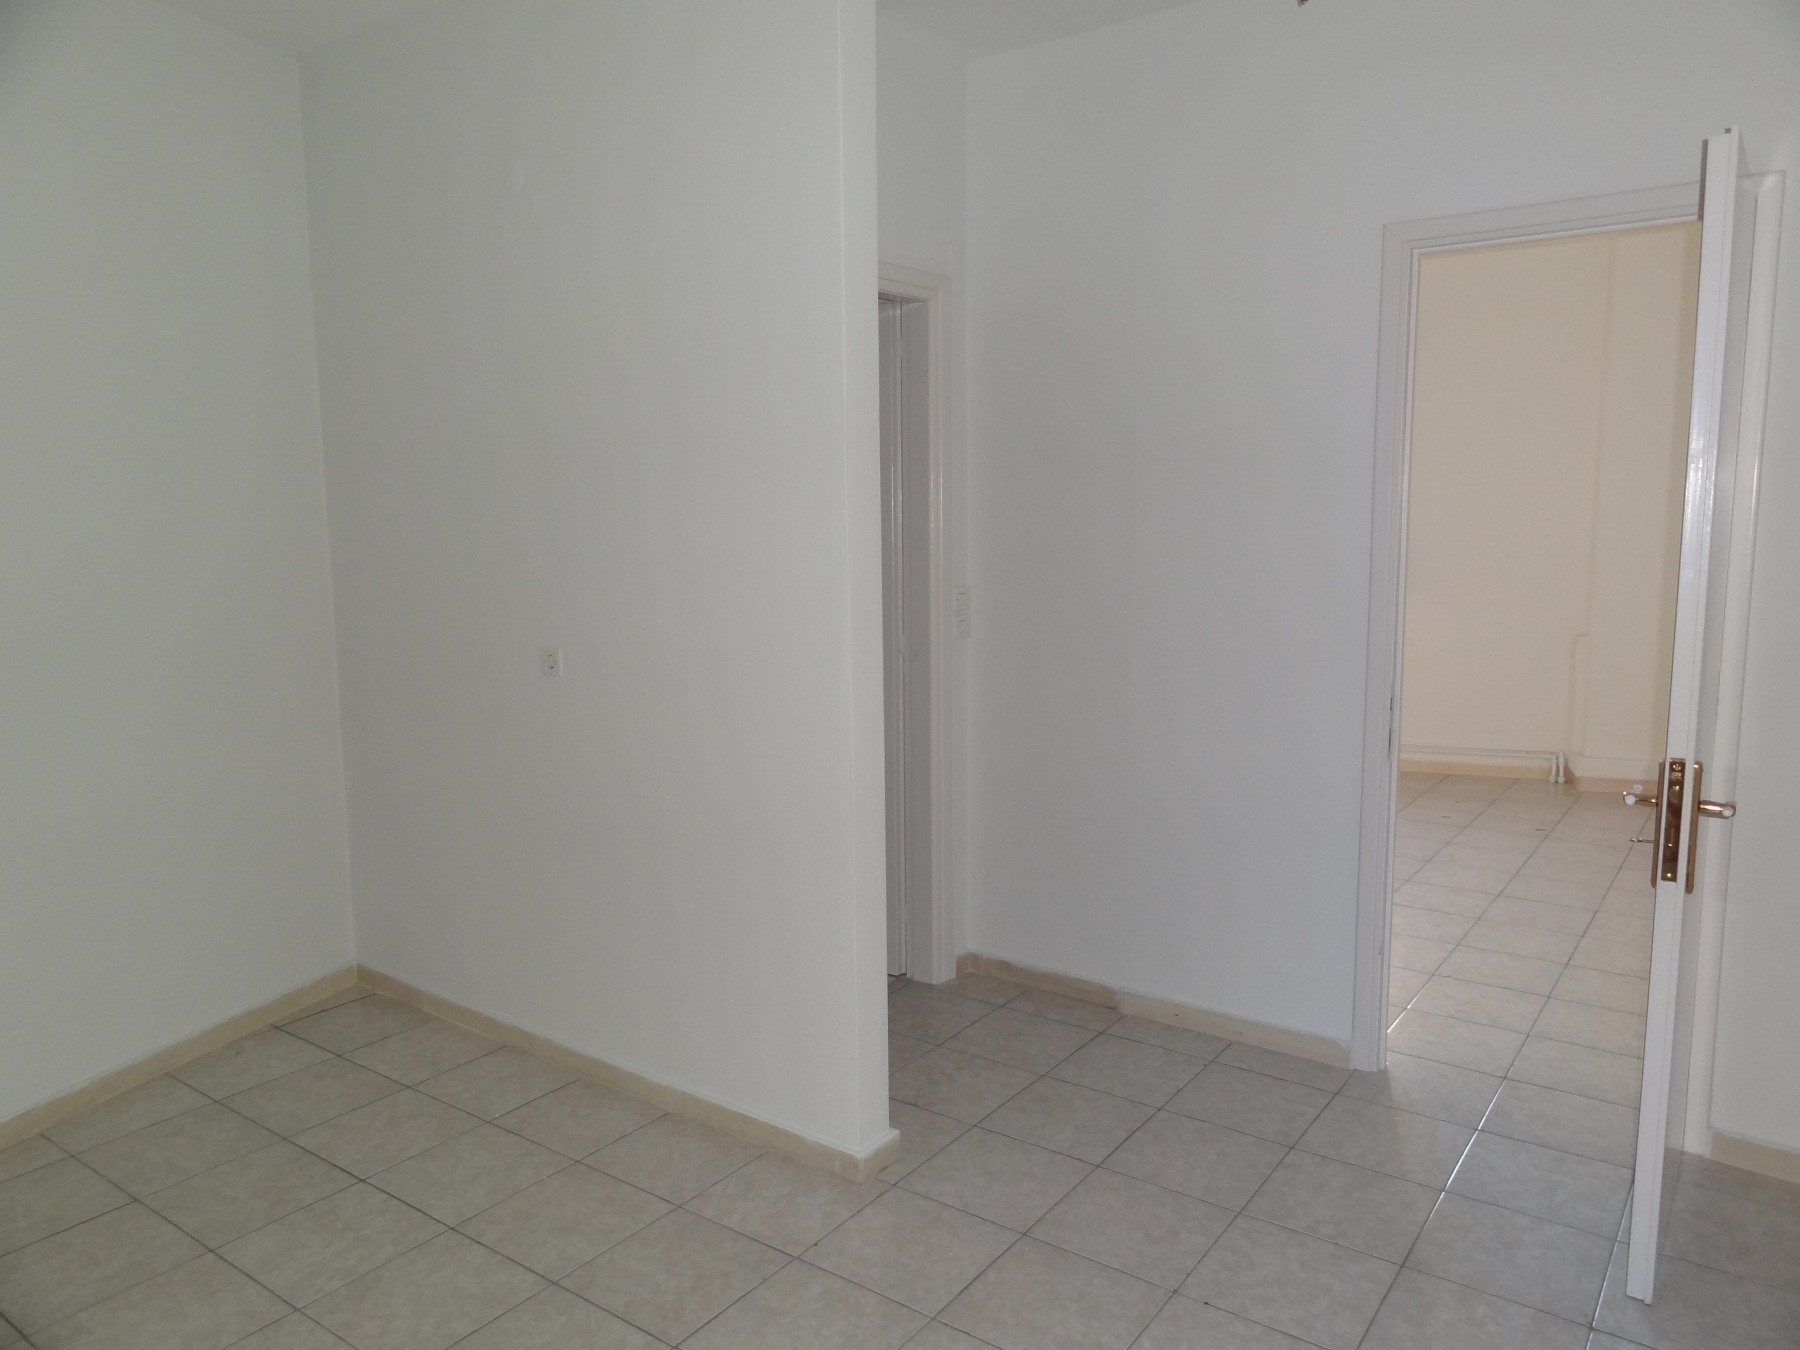 Commercial space for rent 40 sq.m. 2nd floor in the center of Ioannina near the 28th of October street